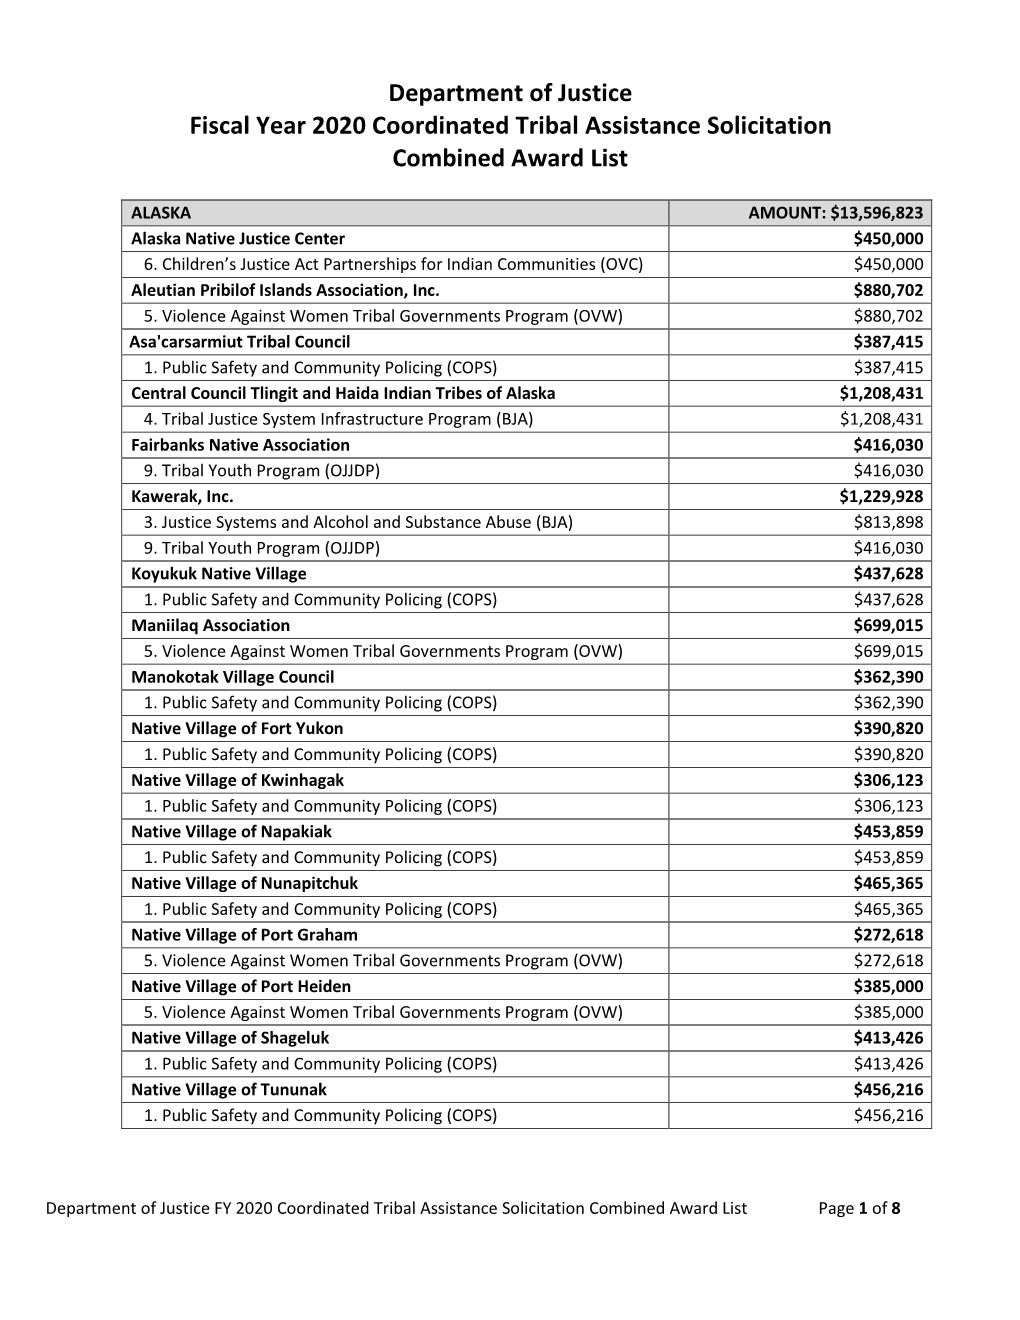 FY 2020 Coordinated Tribal Assistance Solicitation Combined Award List Page 1 of 8 Nunakauyarmiut Tribe $500,950 1